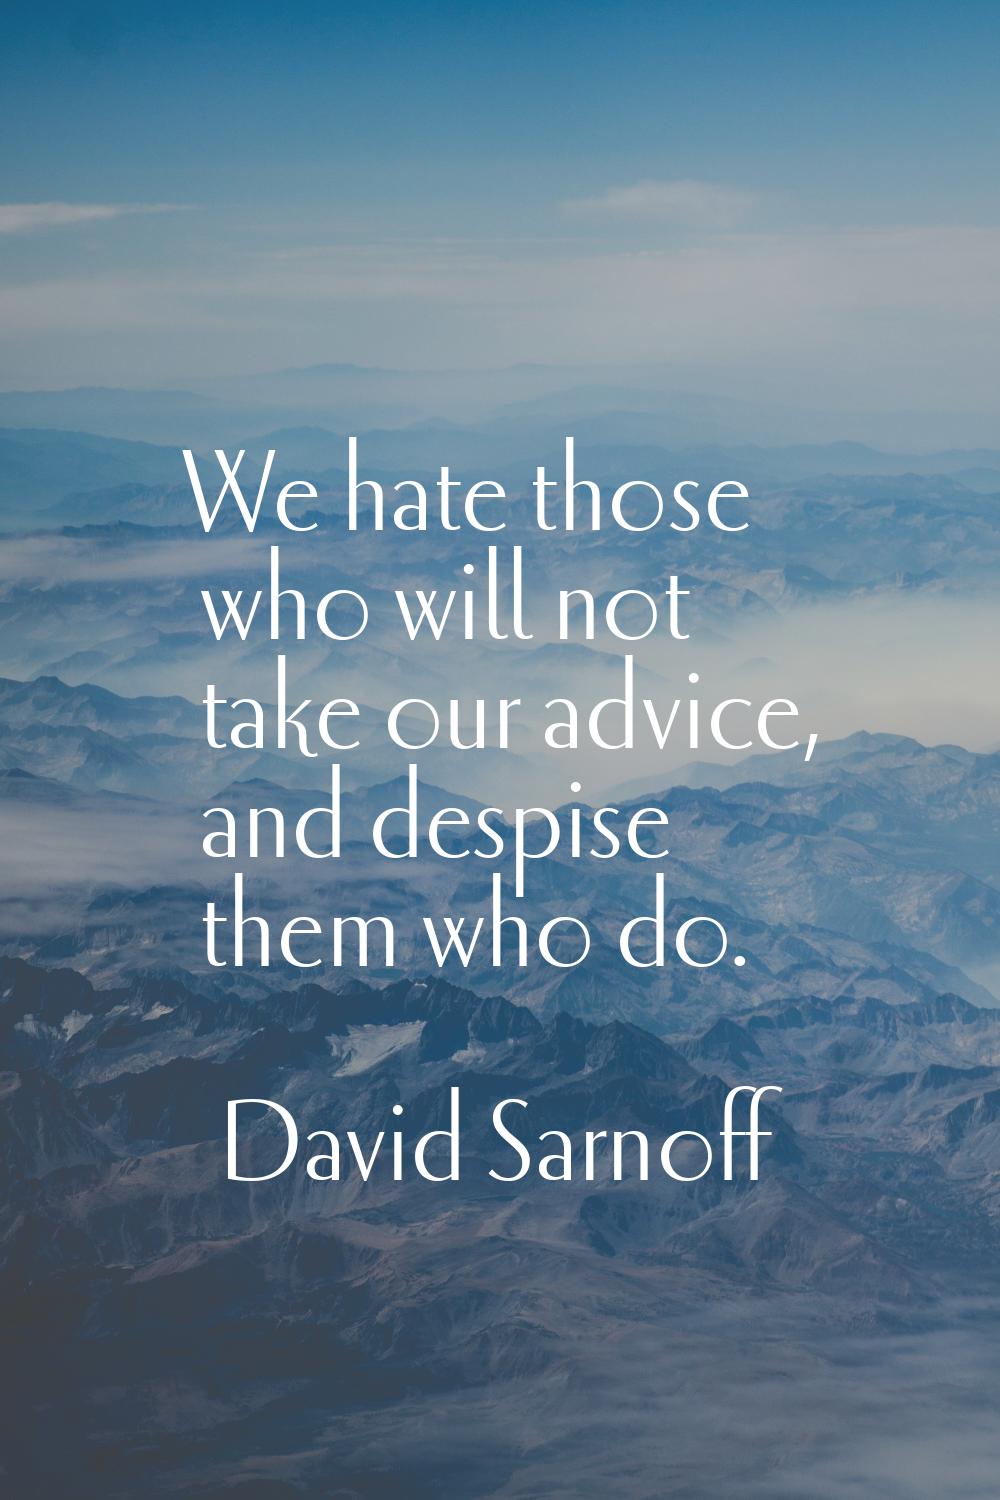 We hate those who will not take our advice, and despise them who do.